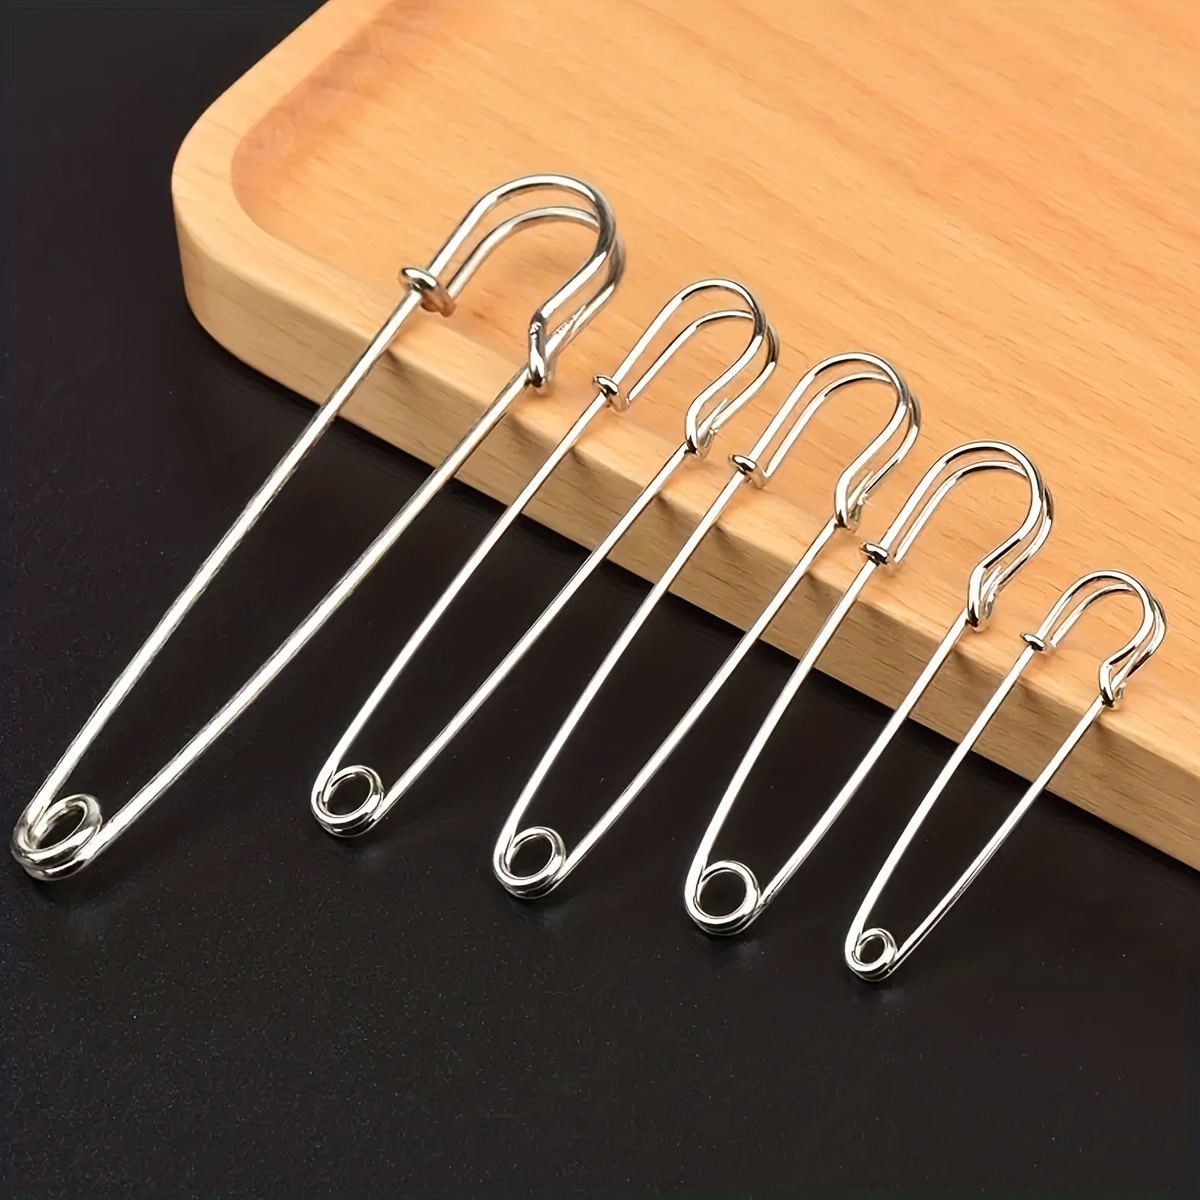 200pcs Safety Pins, 22mm Mini Safety pins Black Nickel Plated Steel Safety  pins Assorted for Clothes Metal Safety Pin for Crafts, Sewing, Pinning